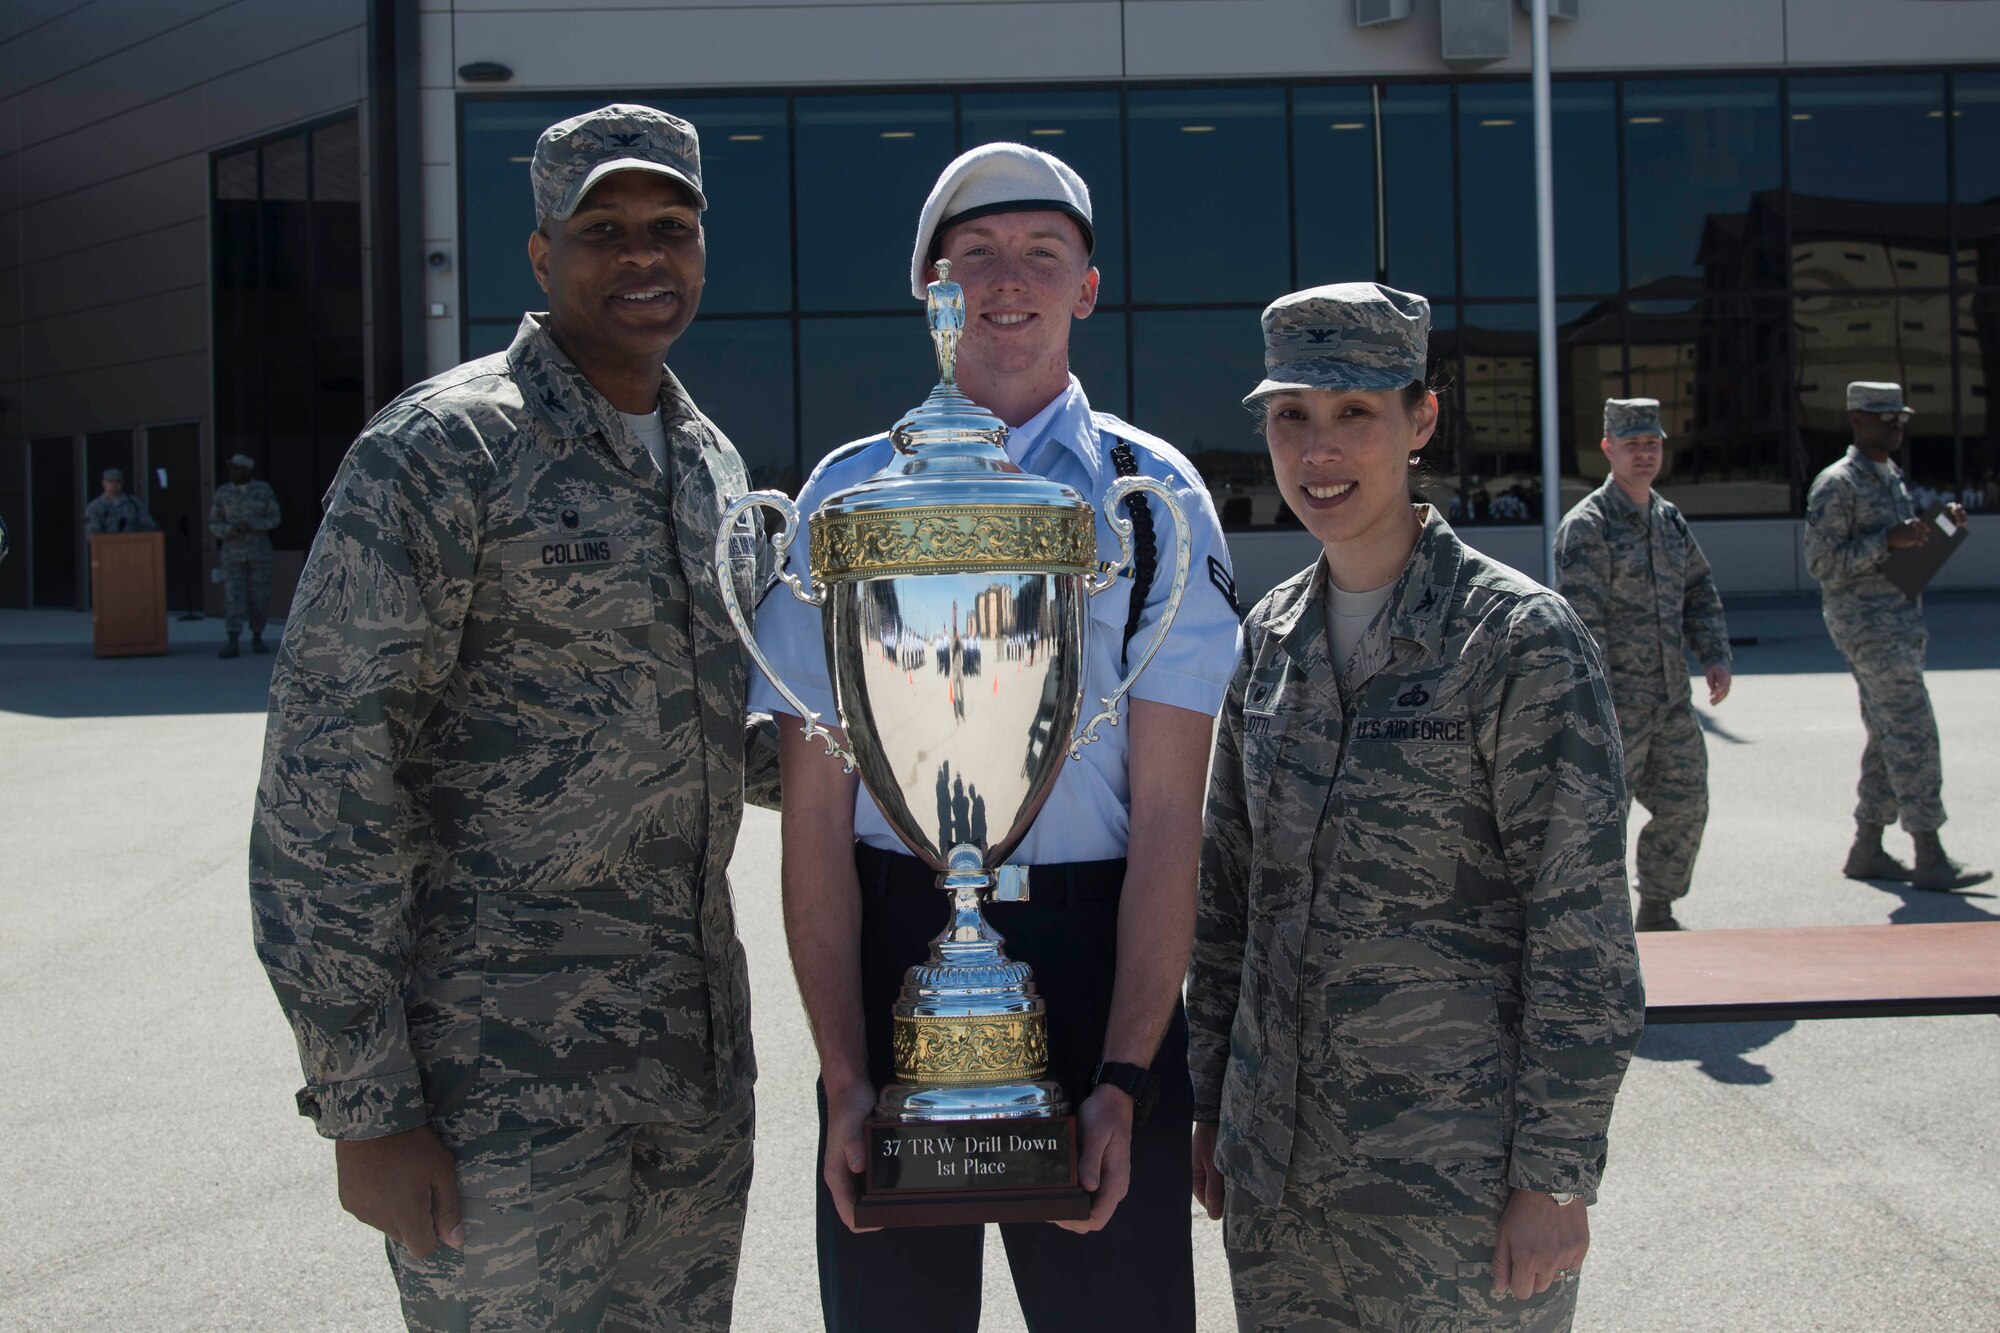 The trophy for first place in the 37th Training Wing Drill Down Invitational is awarded to a representative from the 59th Training Group drill team, by Col. Roy Collins, 37th TRW commander, and Col. Bridget Gigliotti, 37th Training Group commander, at the Pfingston Reception Center at Joint Base San Antonio-Lackland, Texas, Feb. 25, 2017. The 59th Training Group drill team traveled from Joint Base San Antonio-Fort Sam Houston to JBSA-Lackland for the 37th TRW Drill Down Competition. 